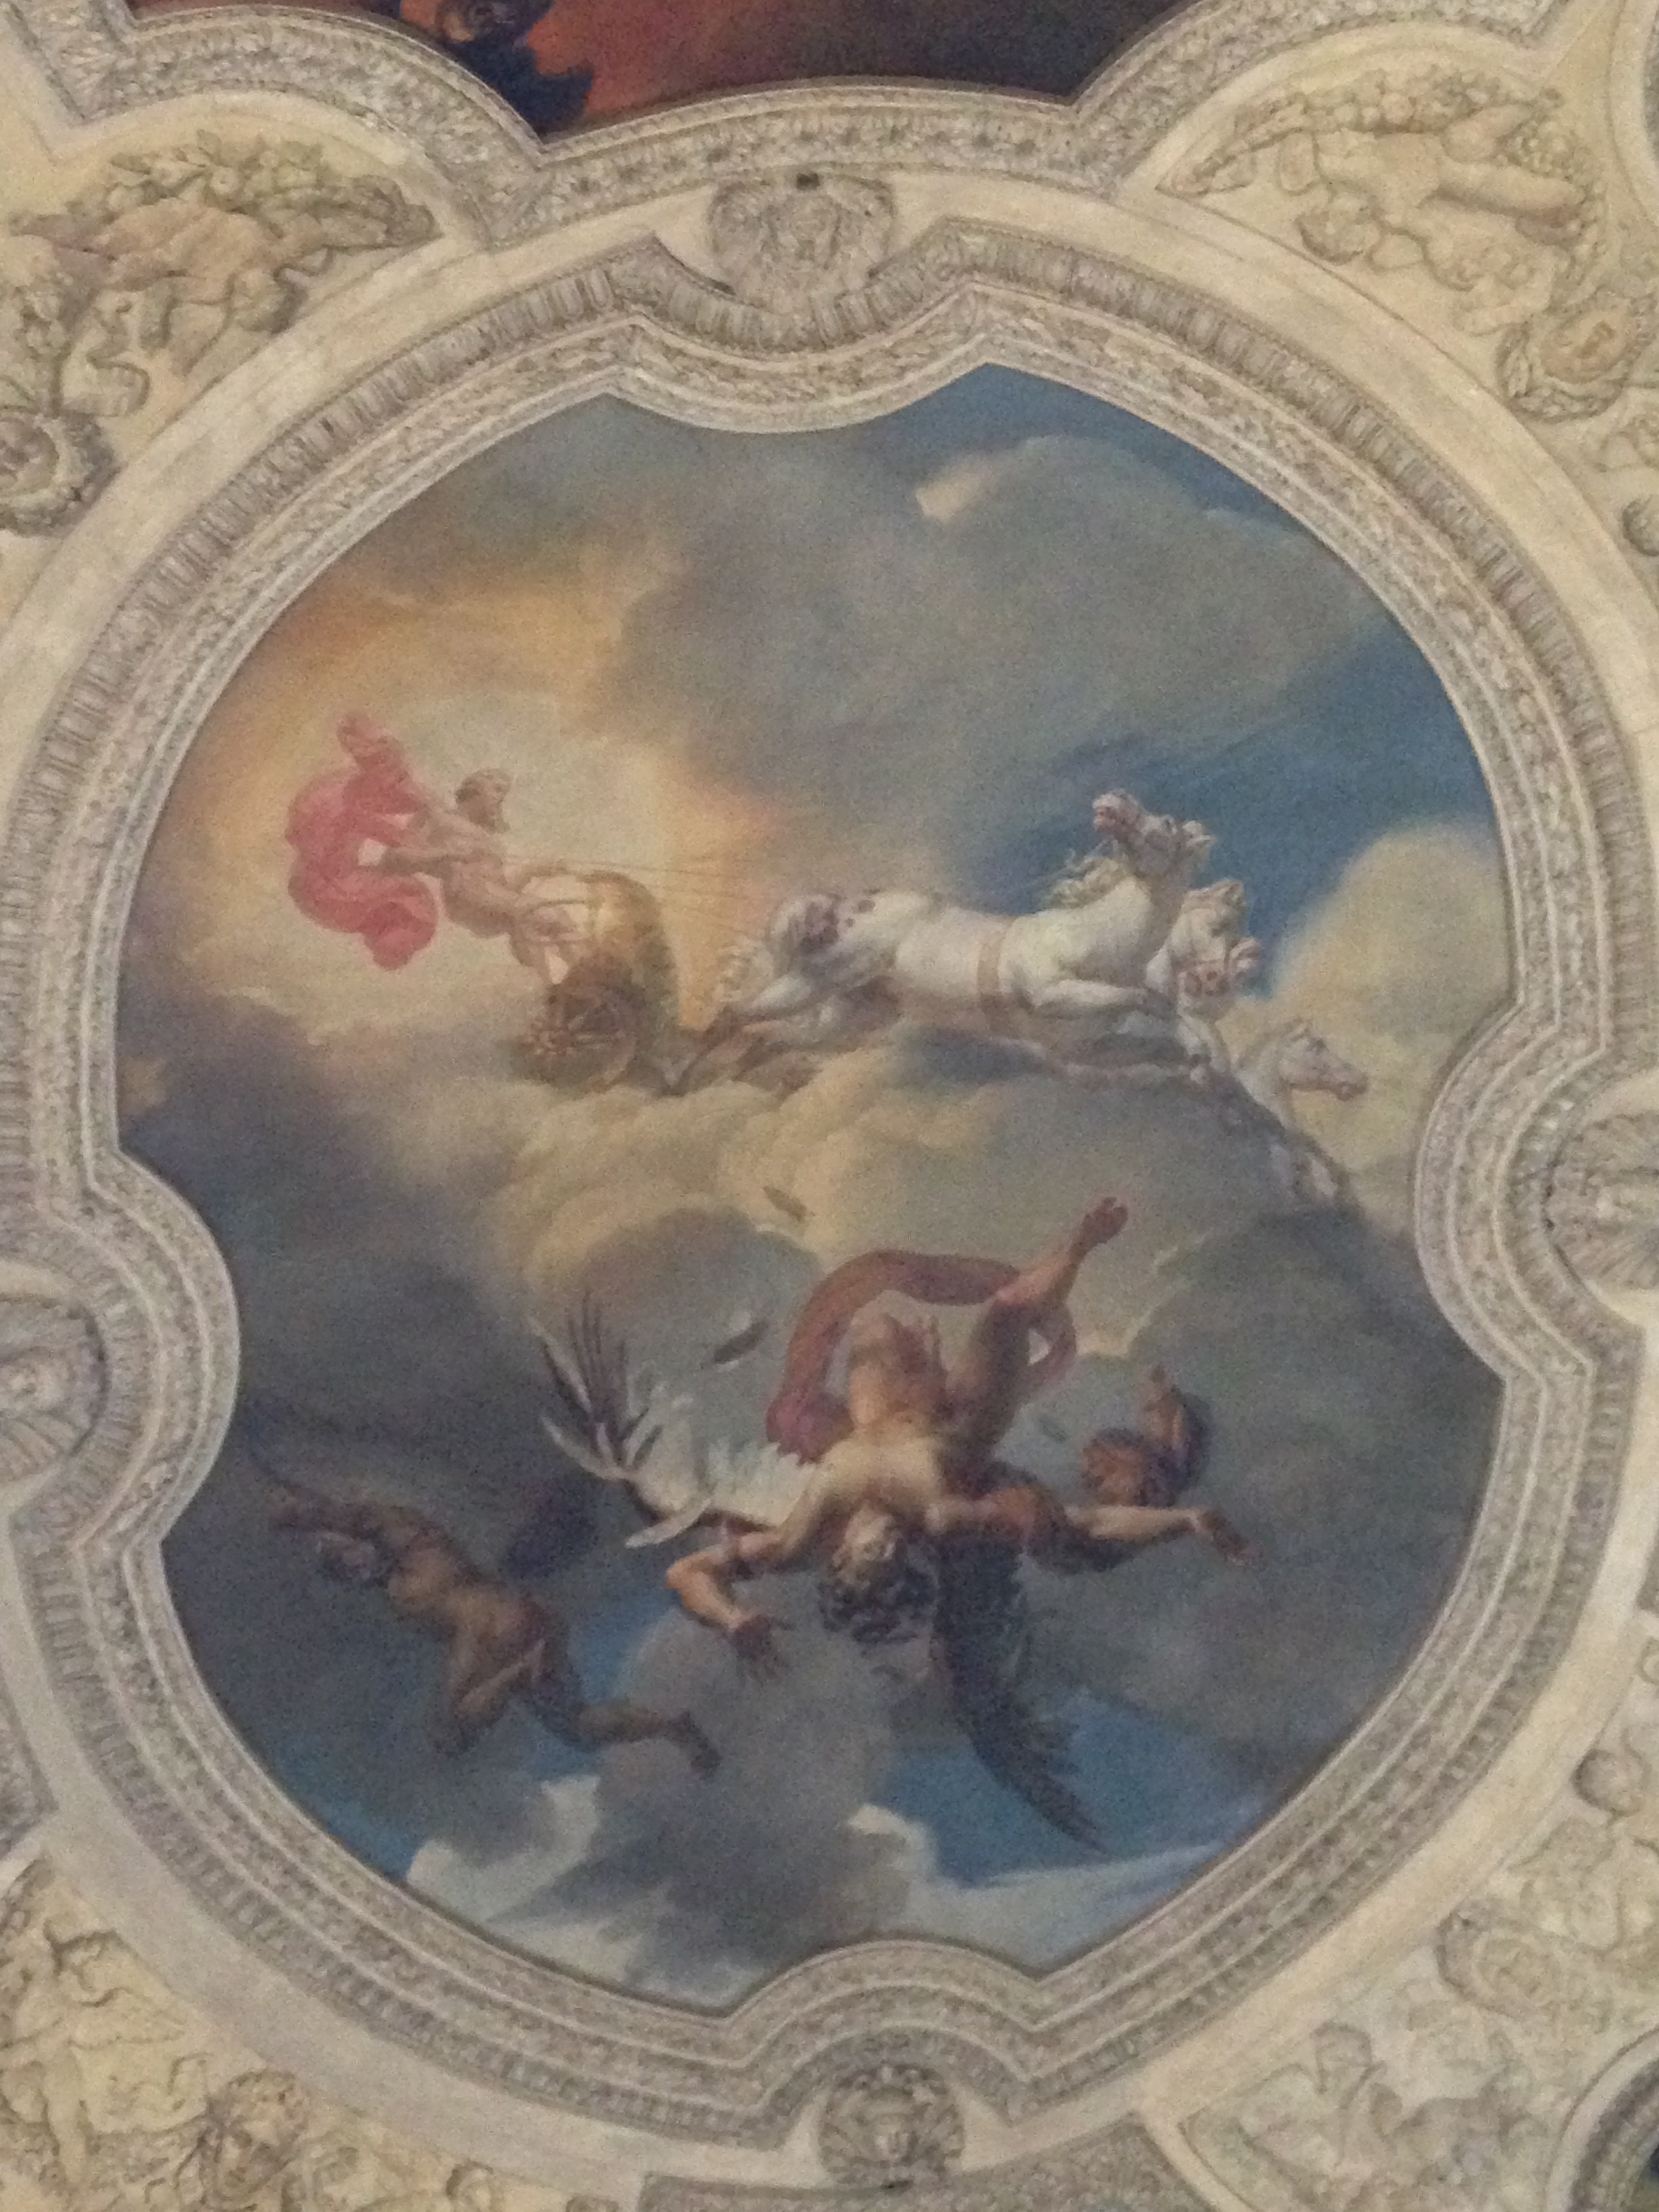  Icarus at the Louvre! 